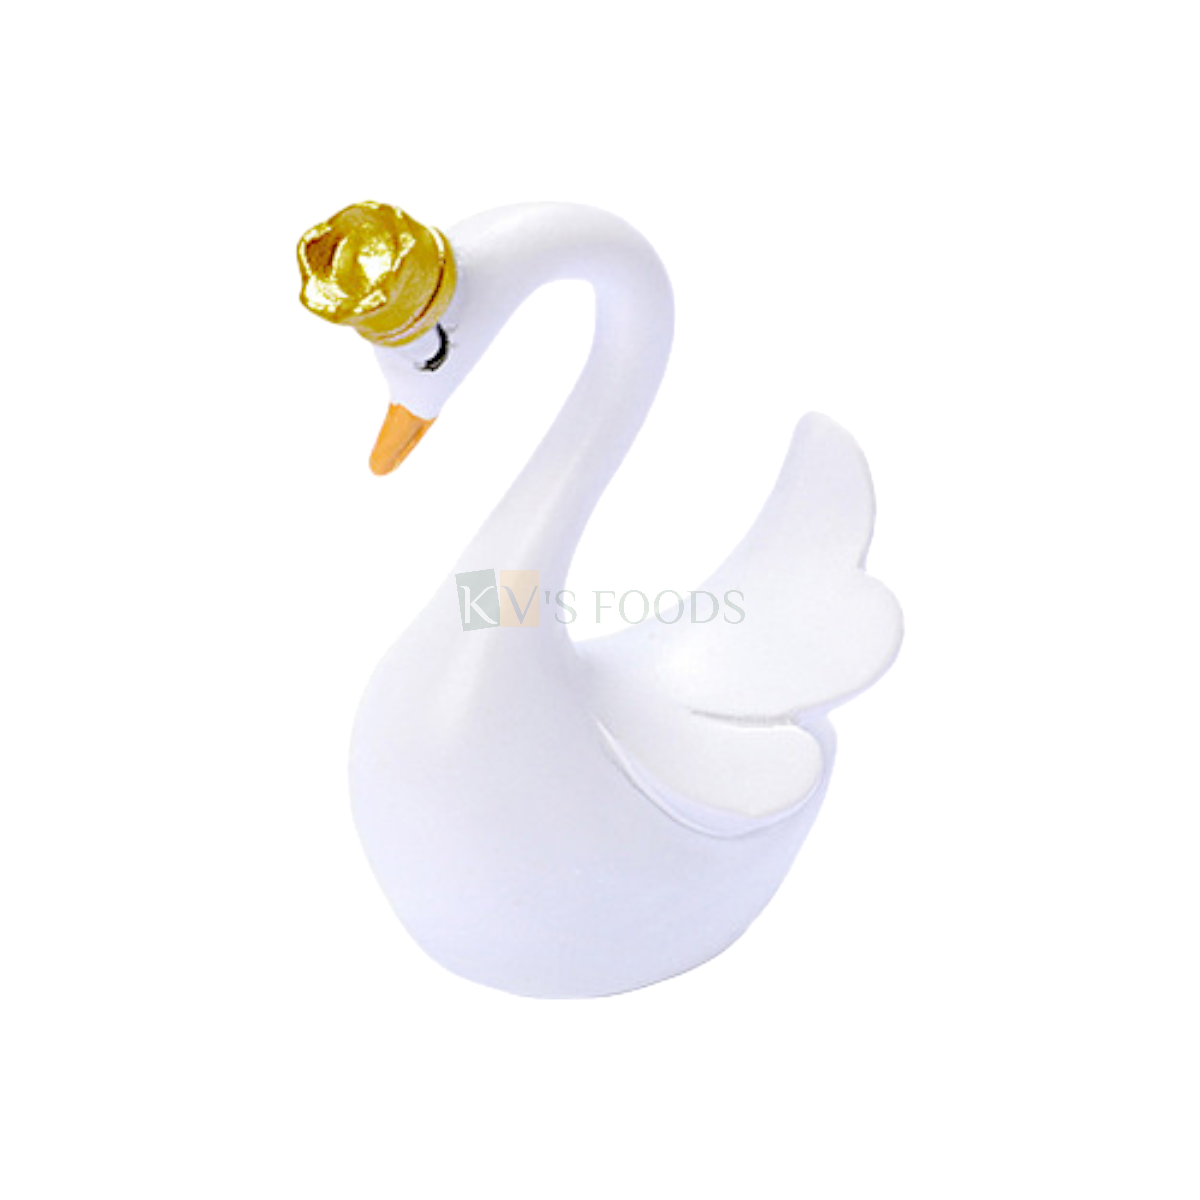 1PC White Swan Animal Small Statue Miniature Figurines Cake Toppers with Golden Crown, Doll Cake Ornaments, Happy Birthday Theme Home Decor, Swan Model Fairy Garden Landscape DIY Cake Decorations